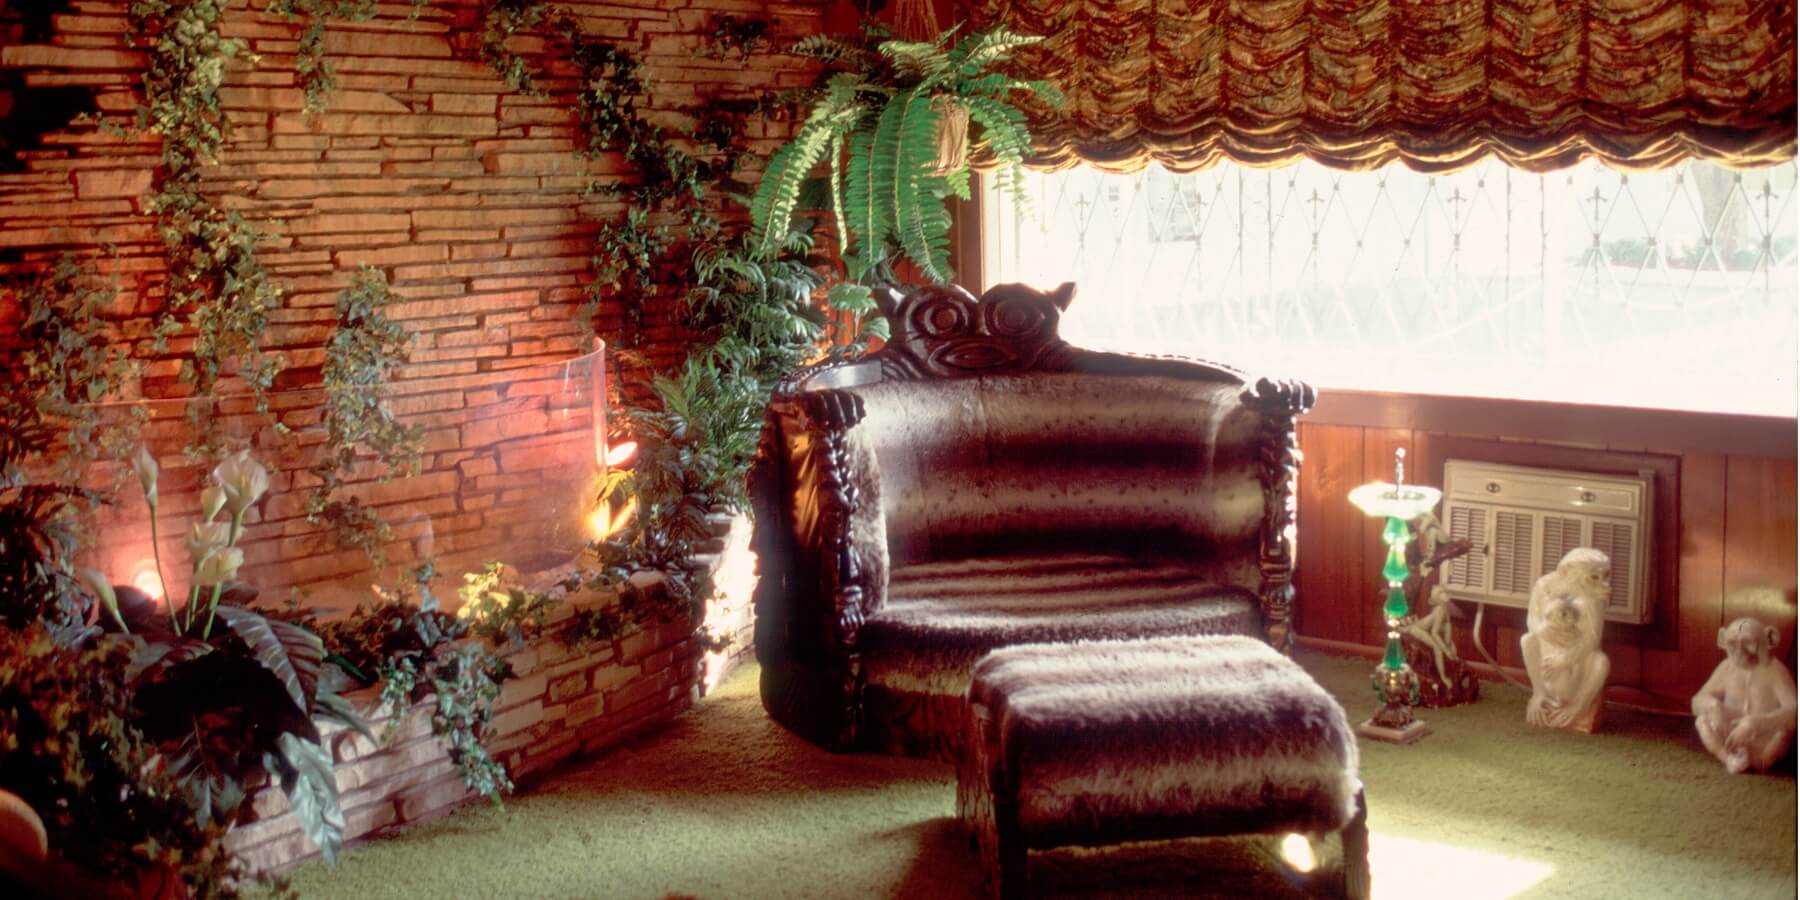 The Jungle Room in Elvis Presley's Graceland home in Memphis, Tennessee